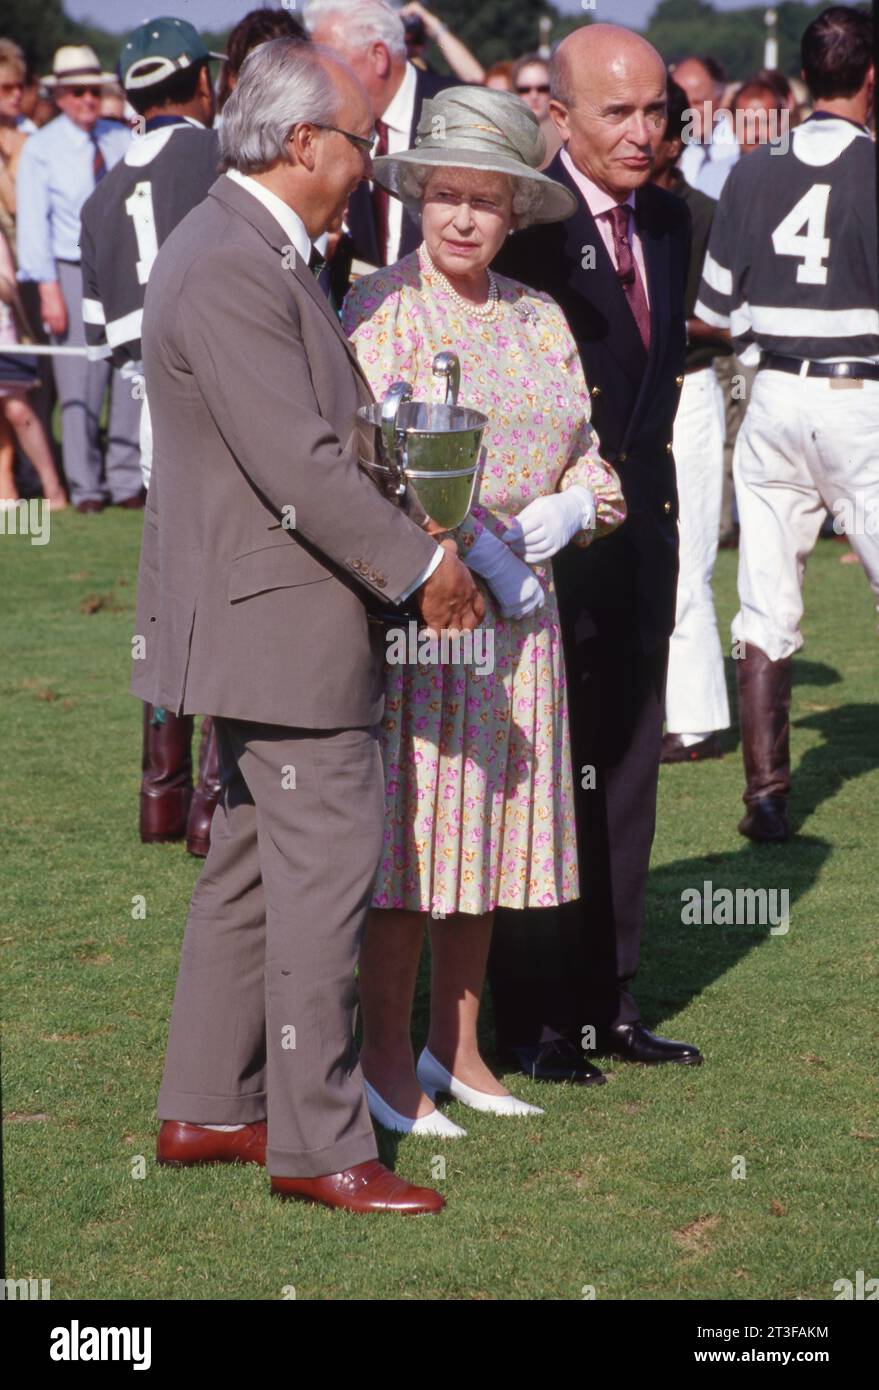 The Queen at The Queen's Cup Polo, Smith's Lawn, Windsor on 15th June 2003   Photo by The Henshaw Archive Stock Photo